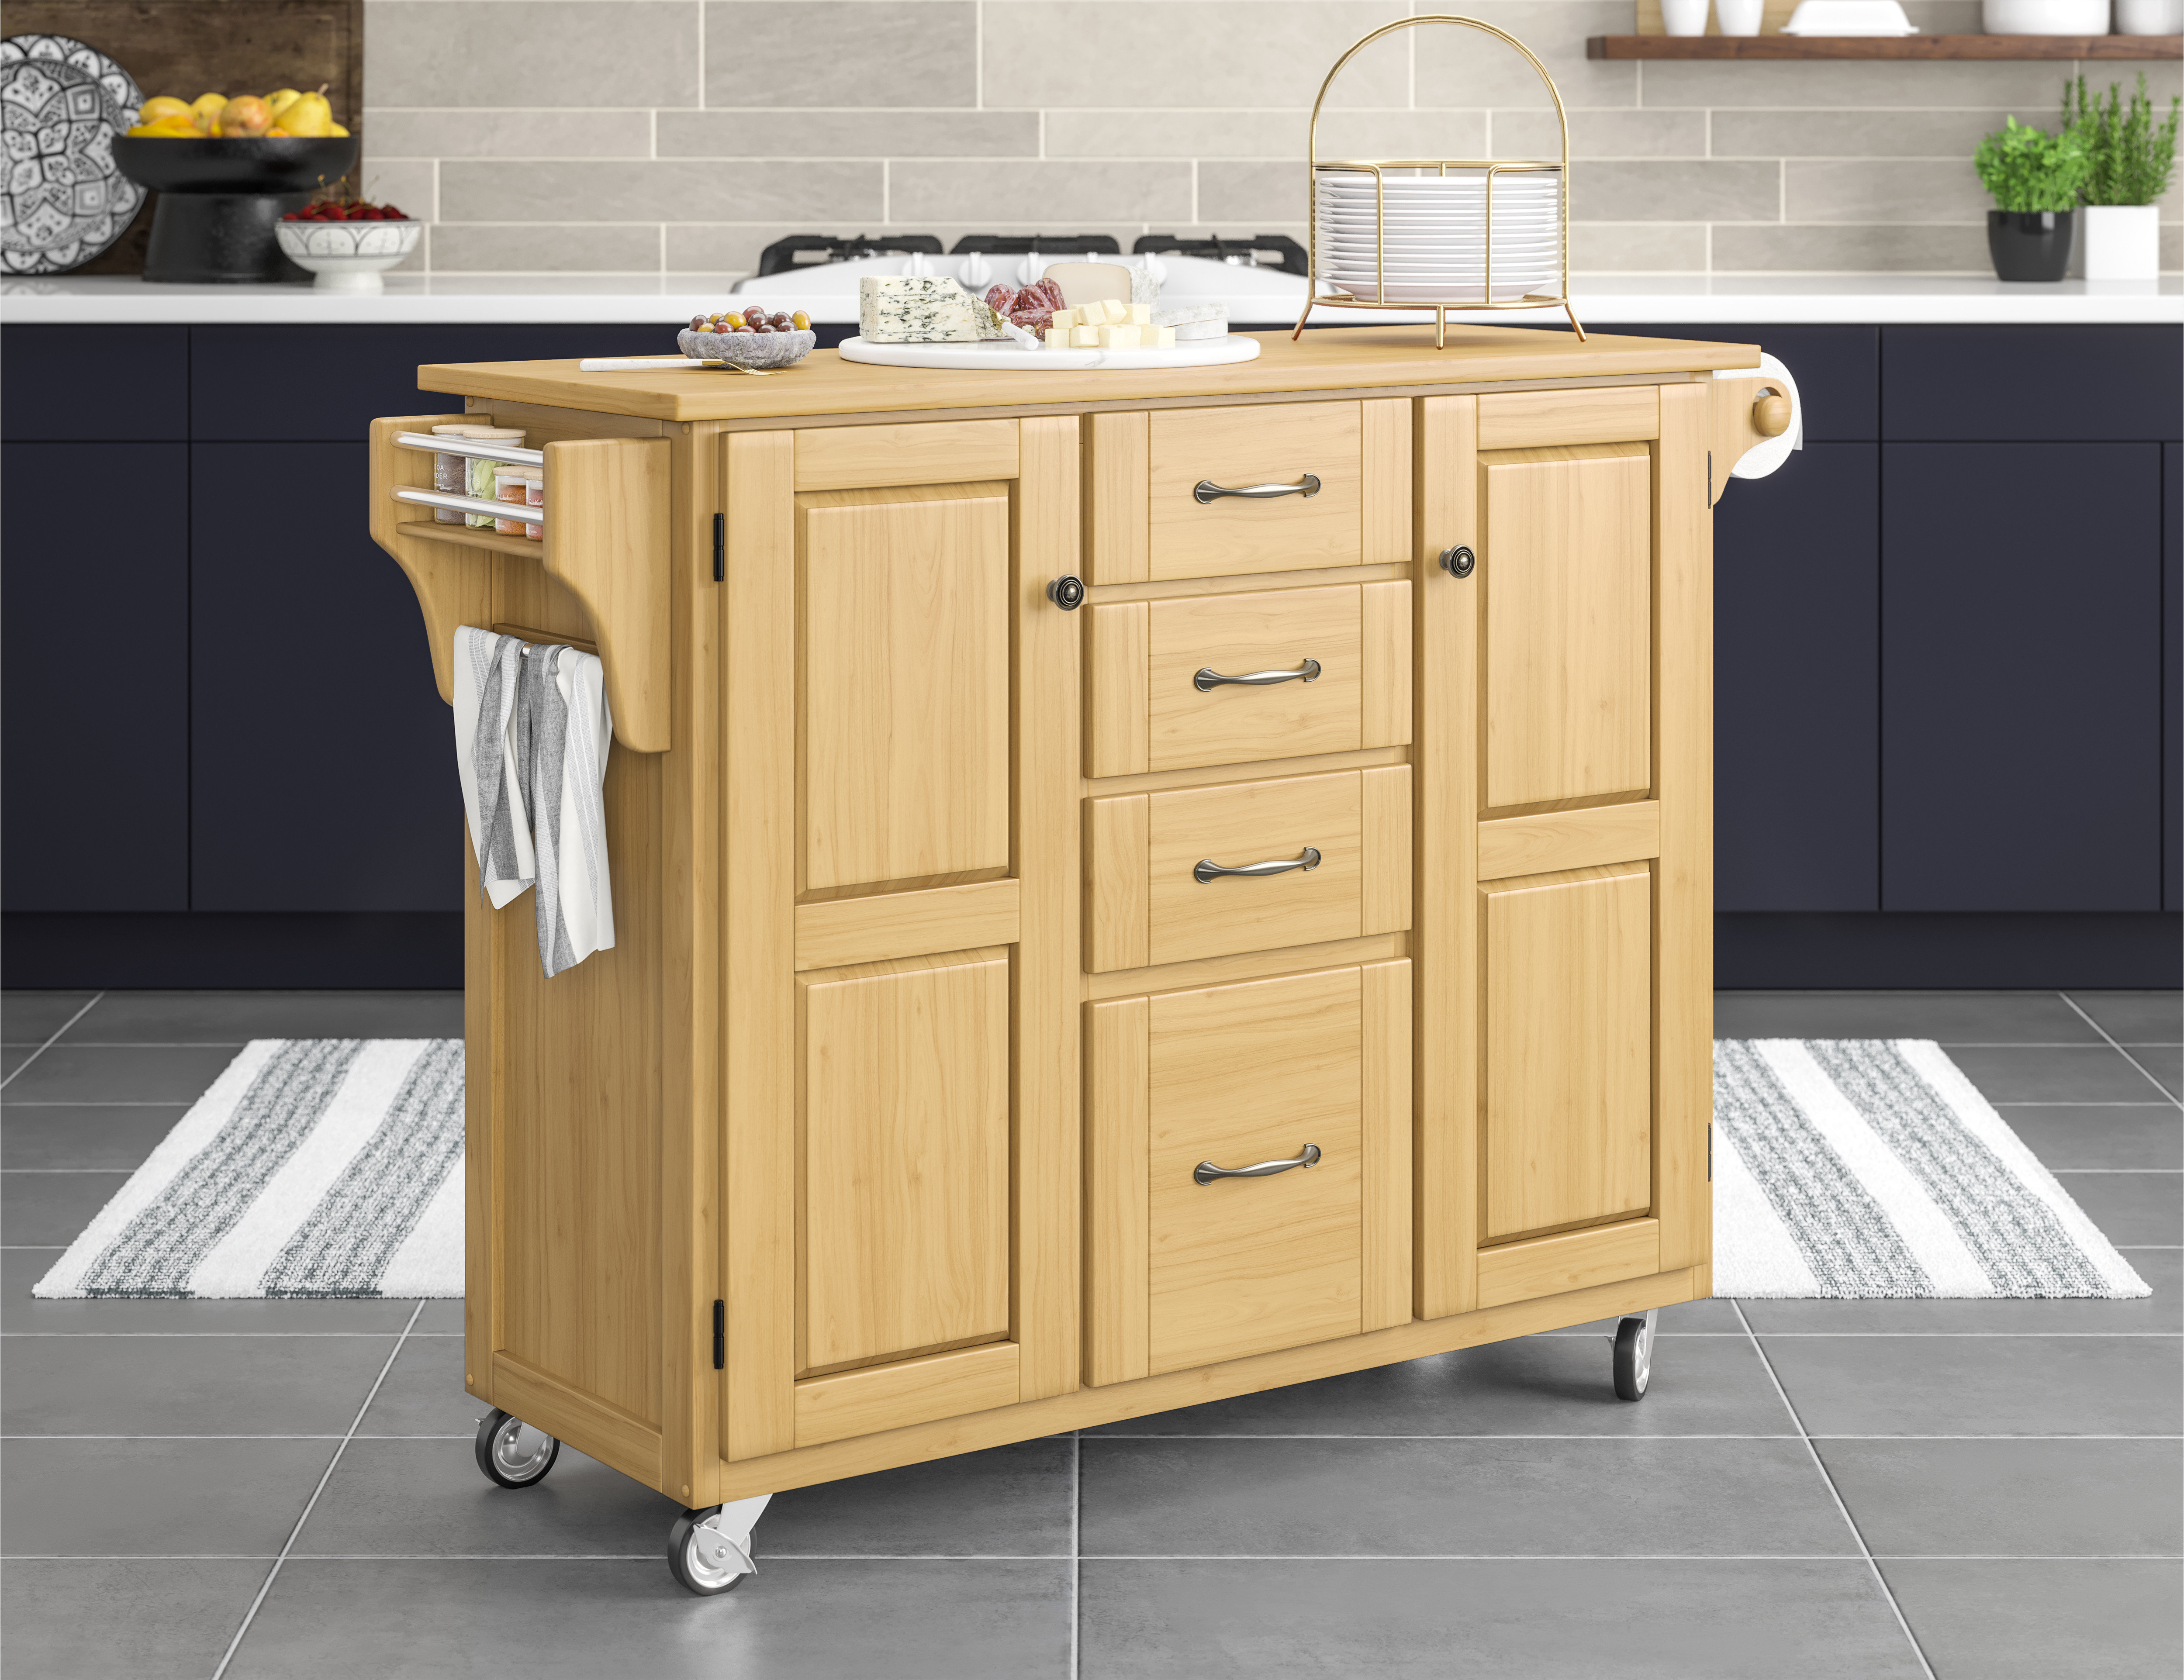 Project Source 36-in W x 35-in H x 23.75-in D Natural Unfinished Oak Sink  Base Fully Assembled Cabinet (Flat Panel Square Door Style) in the Kitchen  Cabinets department at